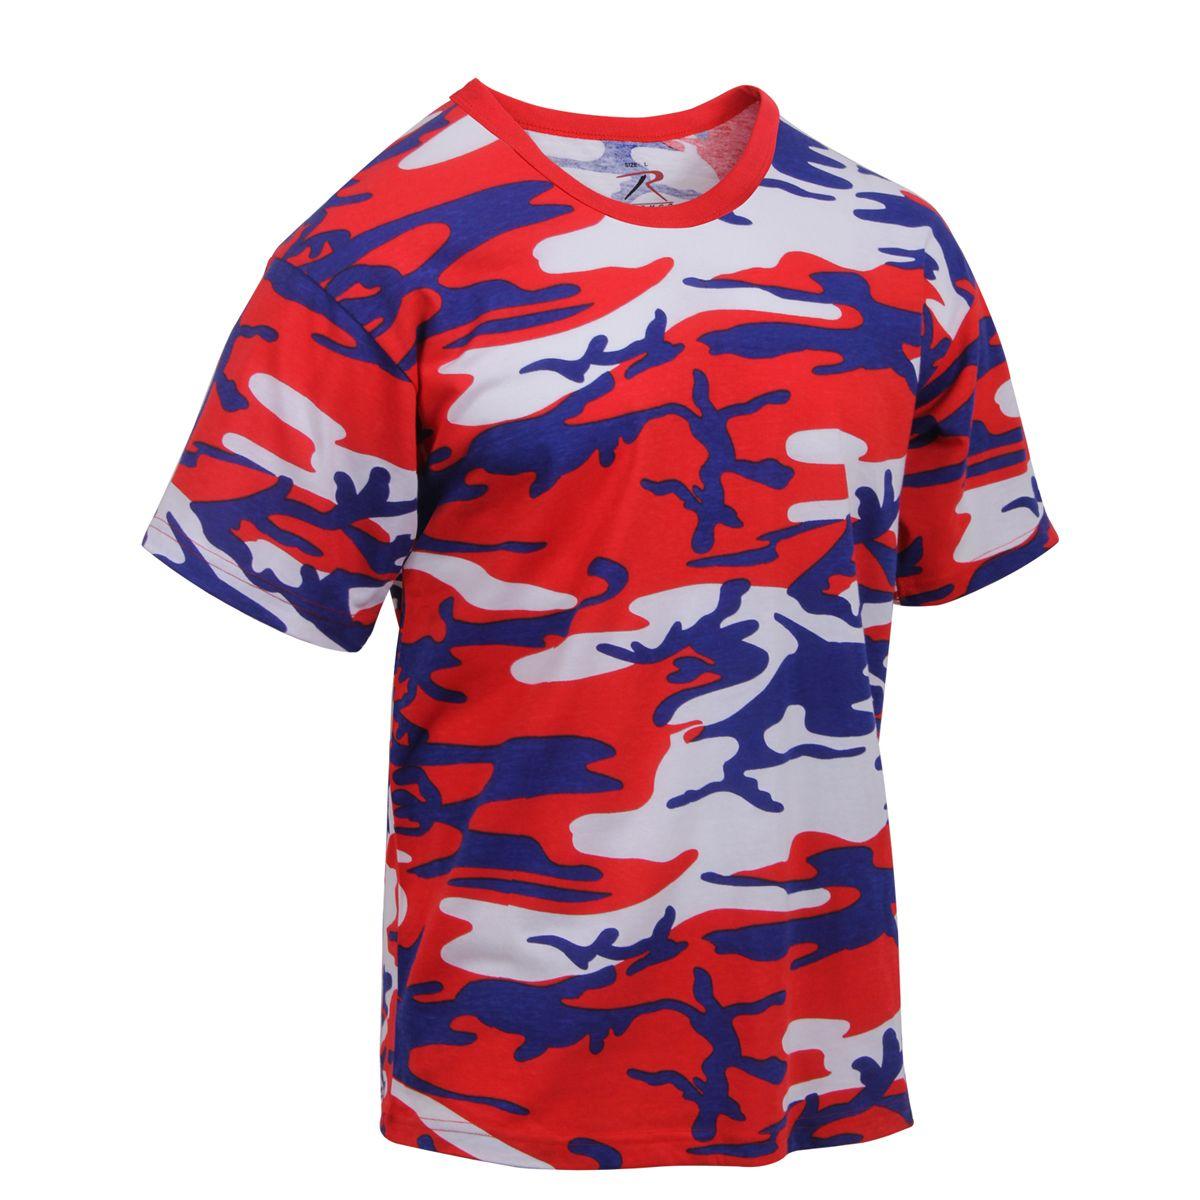 Red White and Blue Clothing Logo - Shop Red White Blue Camo T Shirts Army Navy